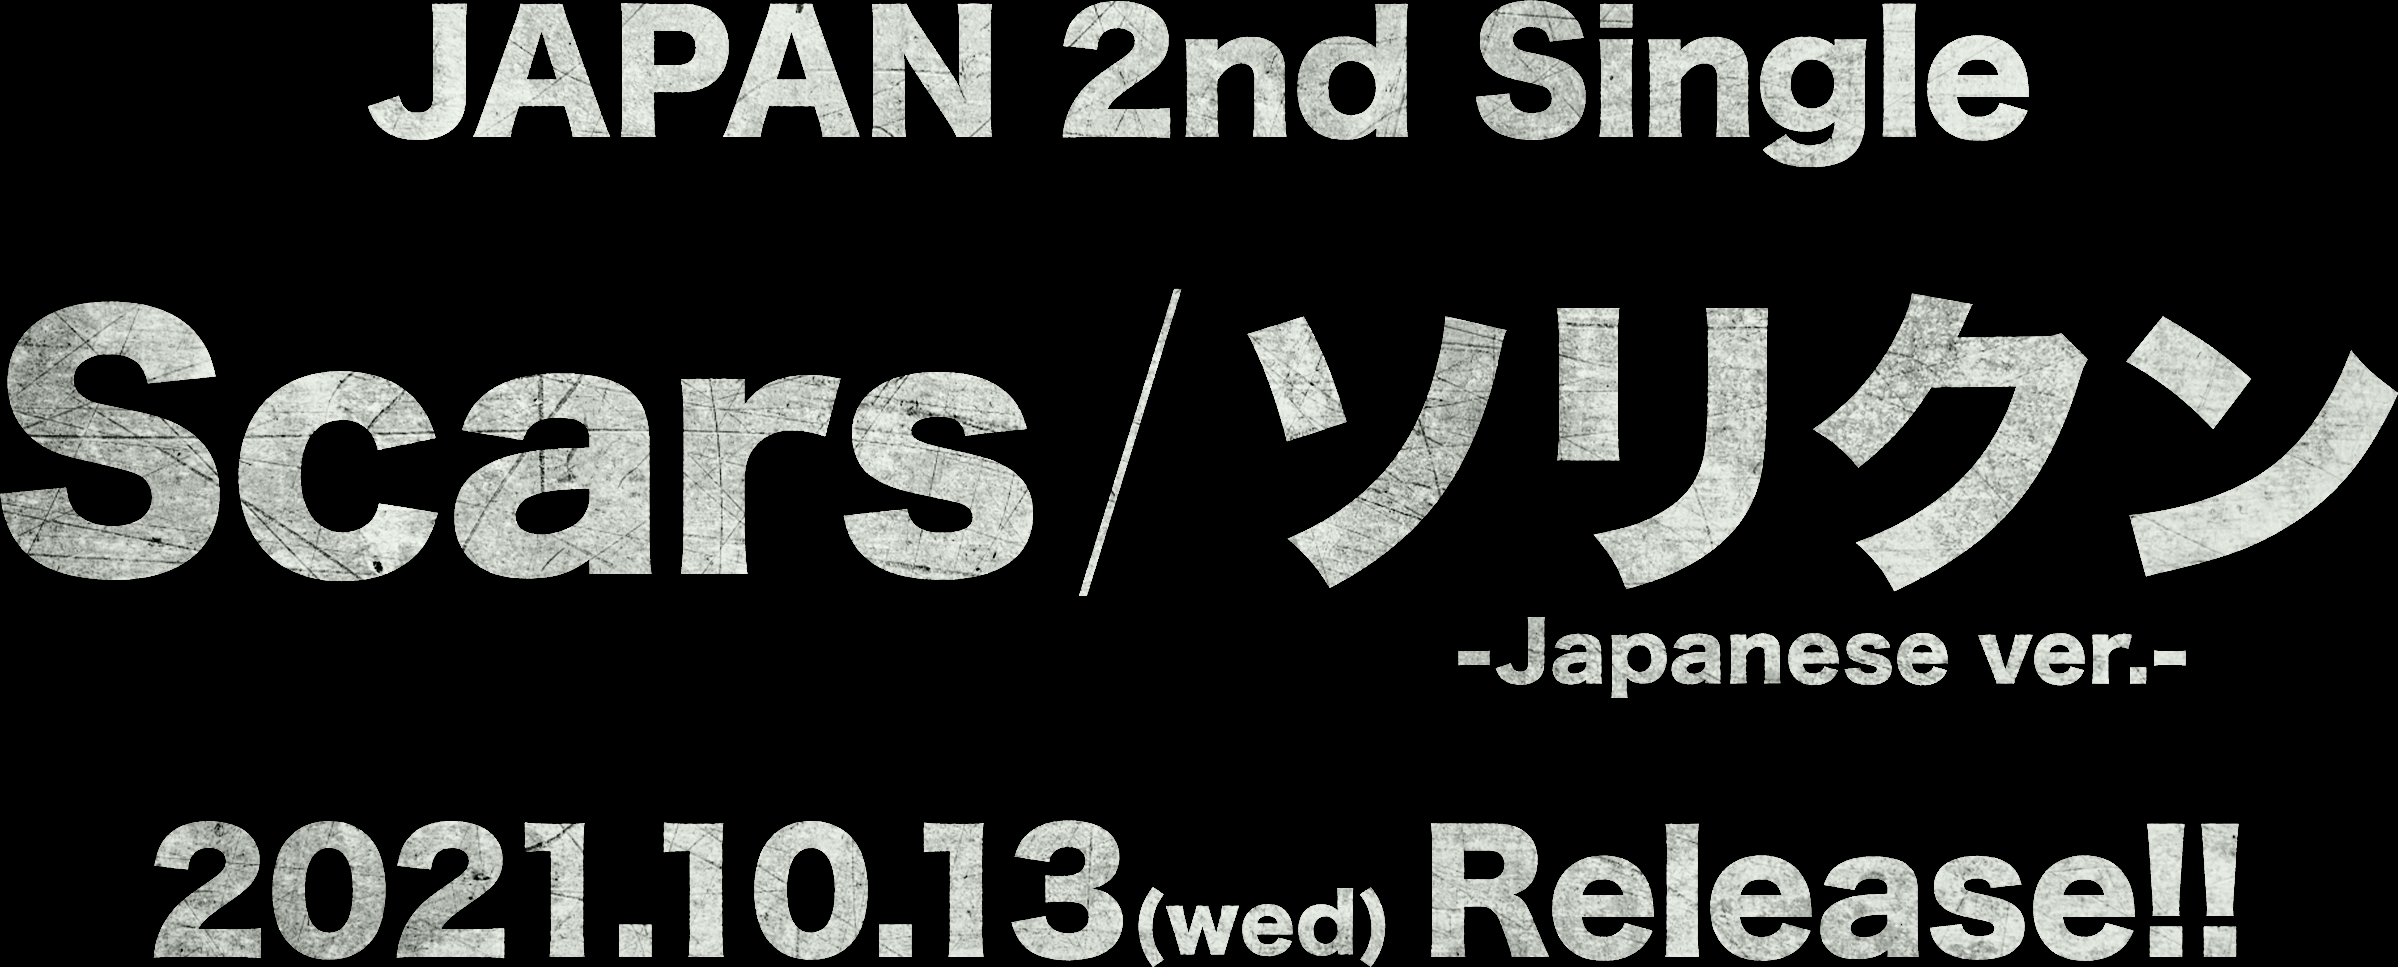 Stray Kids JAPAN 2nd Single『Scars / ソリクン -Japanese ver.-』2021.10.13(wed) Release!!